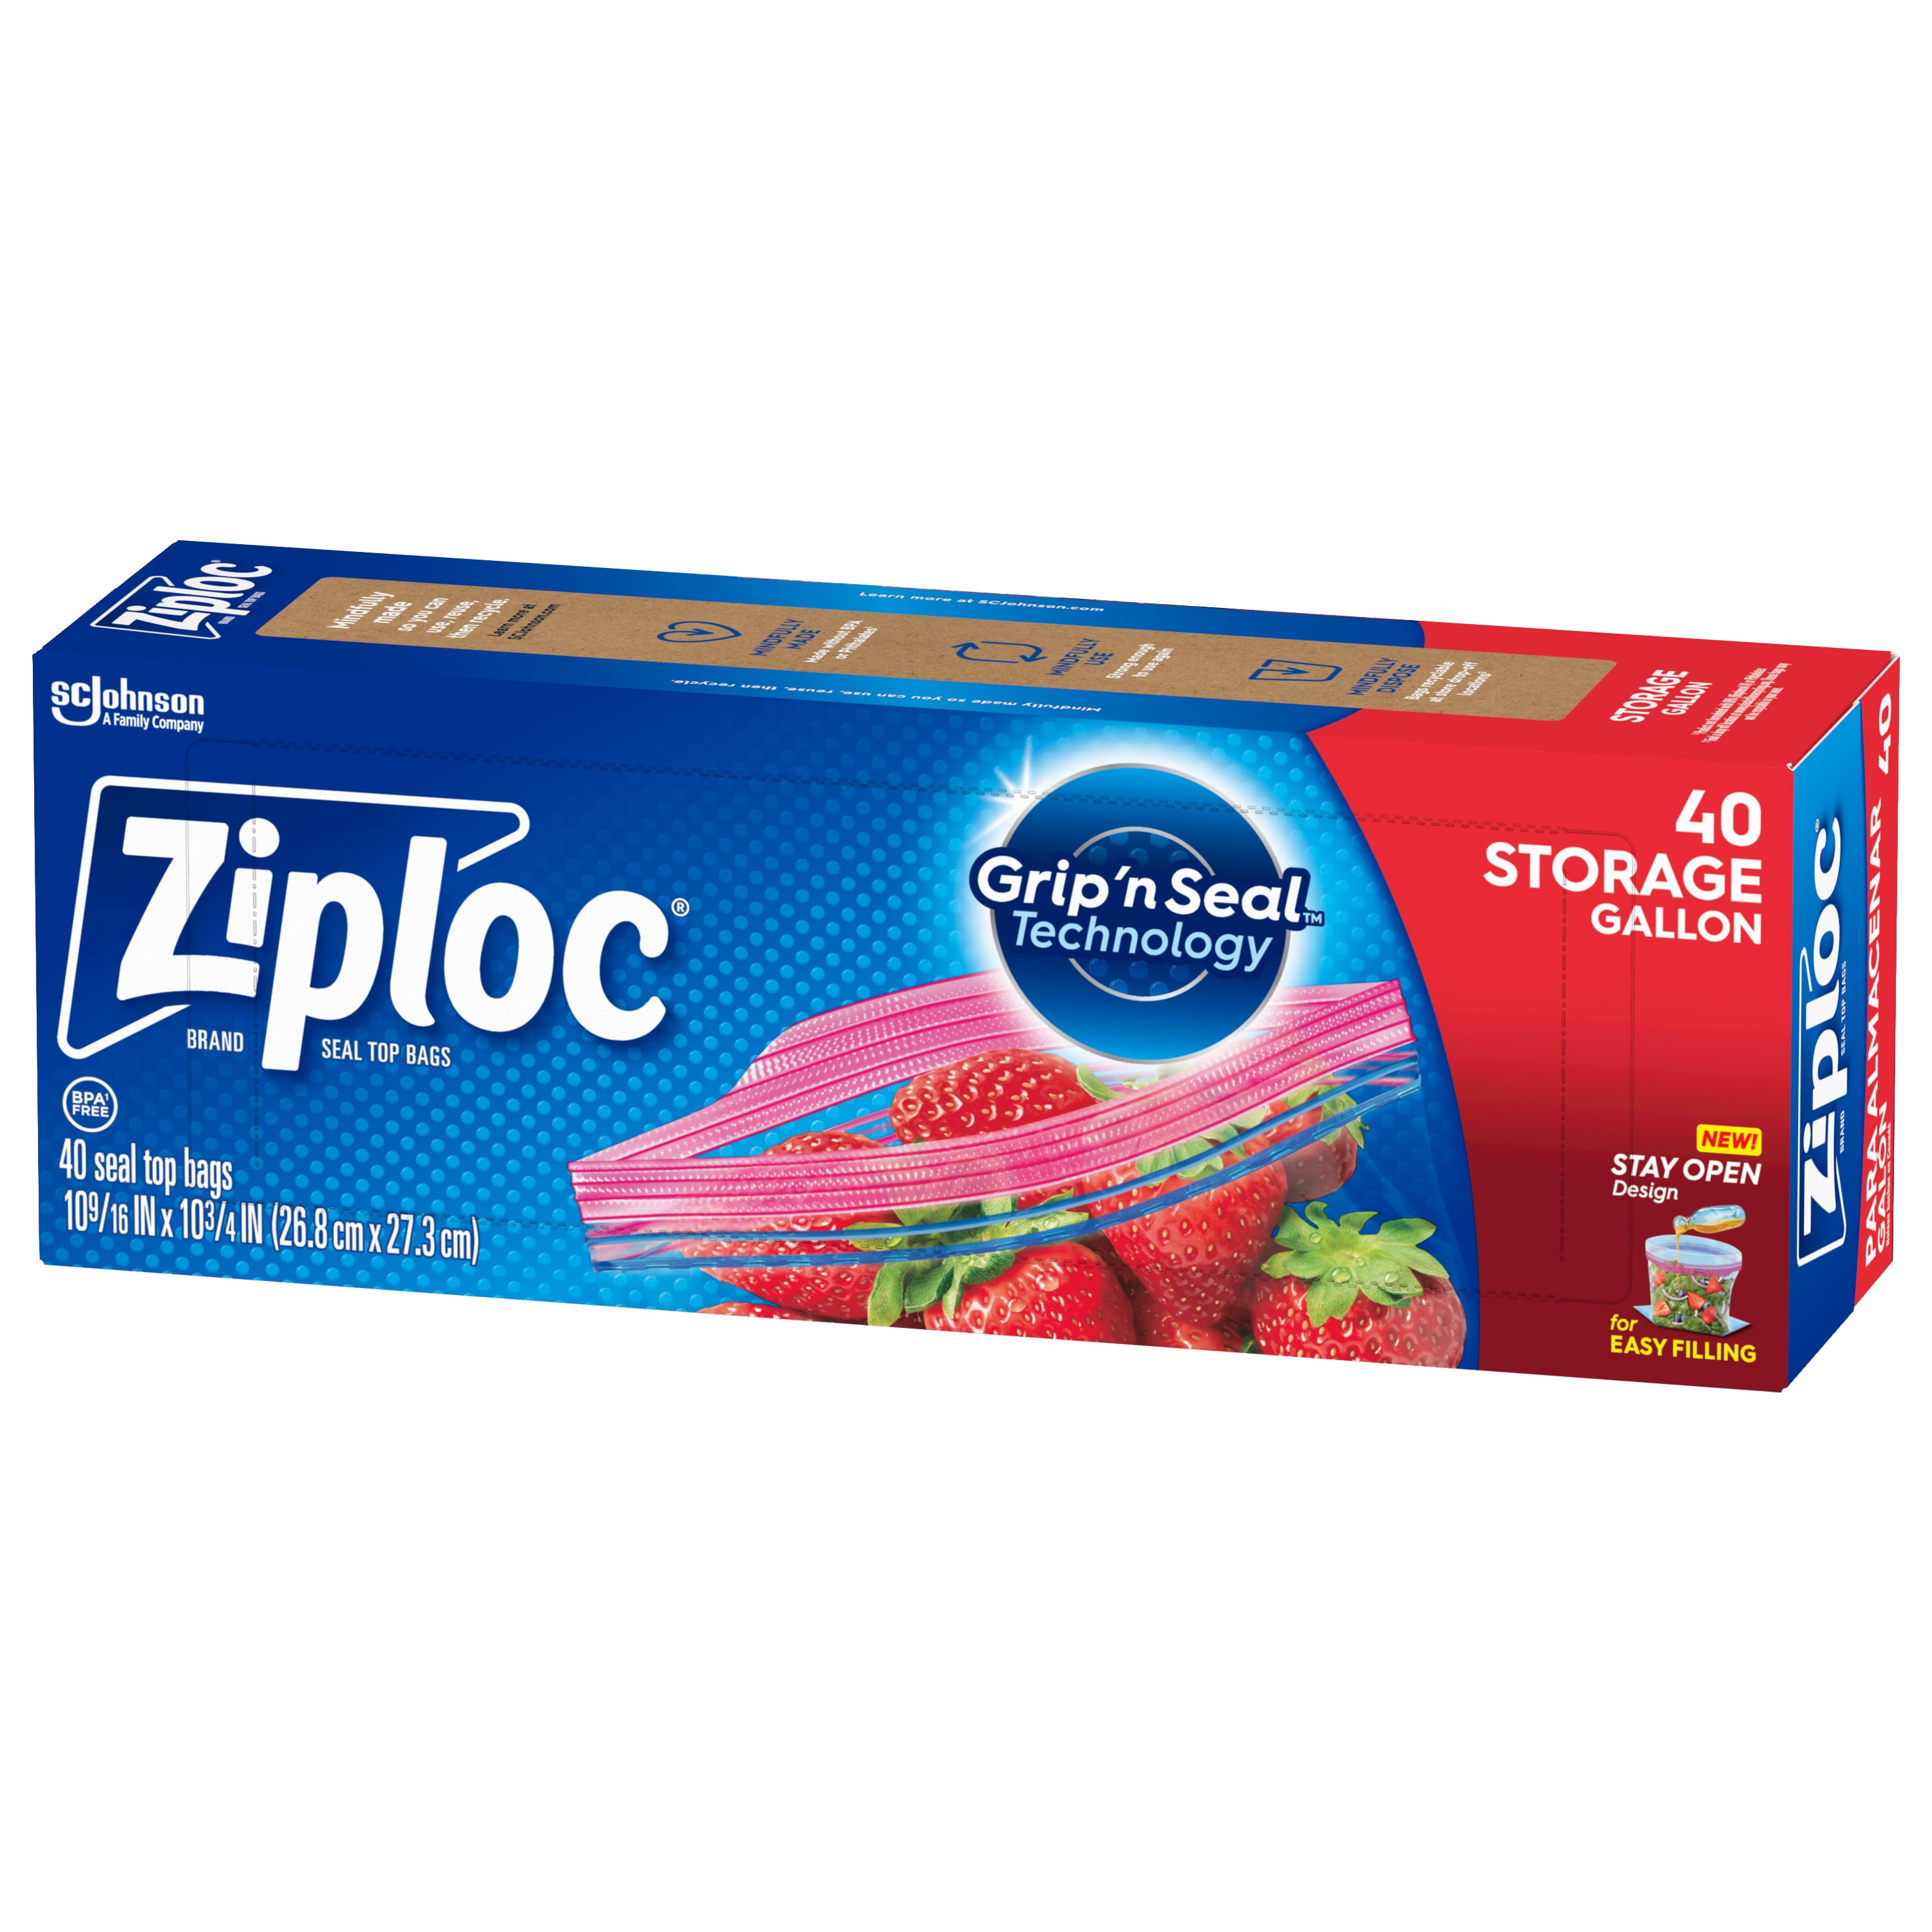 Ziploc Quart Food Storage Bags, Grip 'n Seal Technology for Easier Grip,  Open, and Close, 48 Count, Holiday Designs, Packaging May Vary